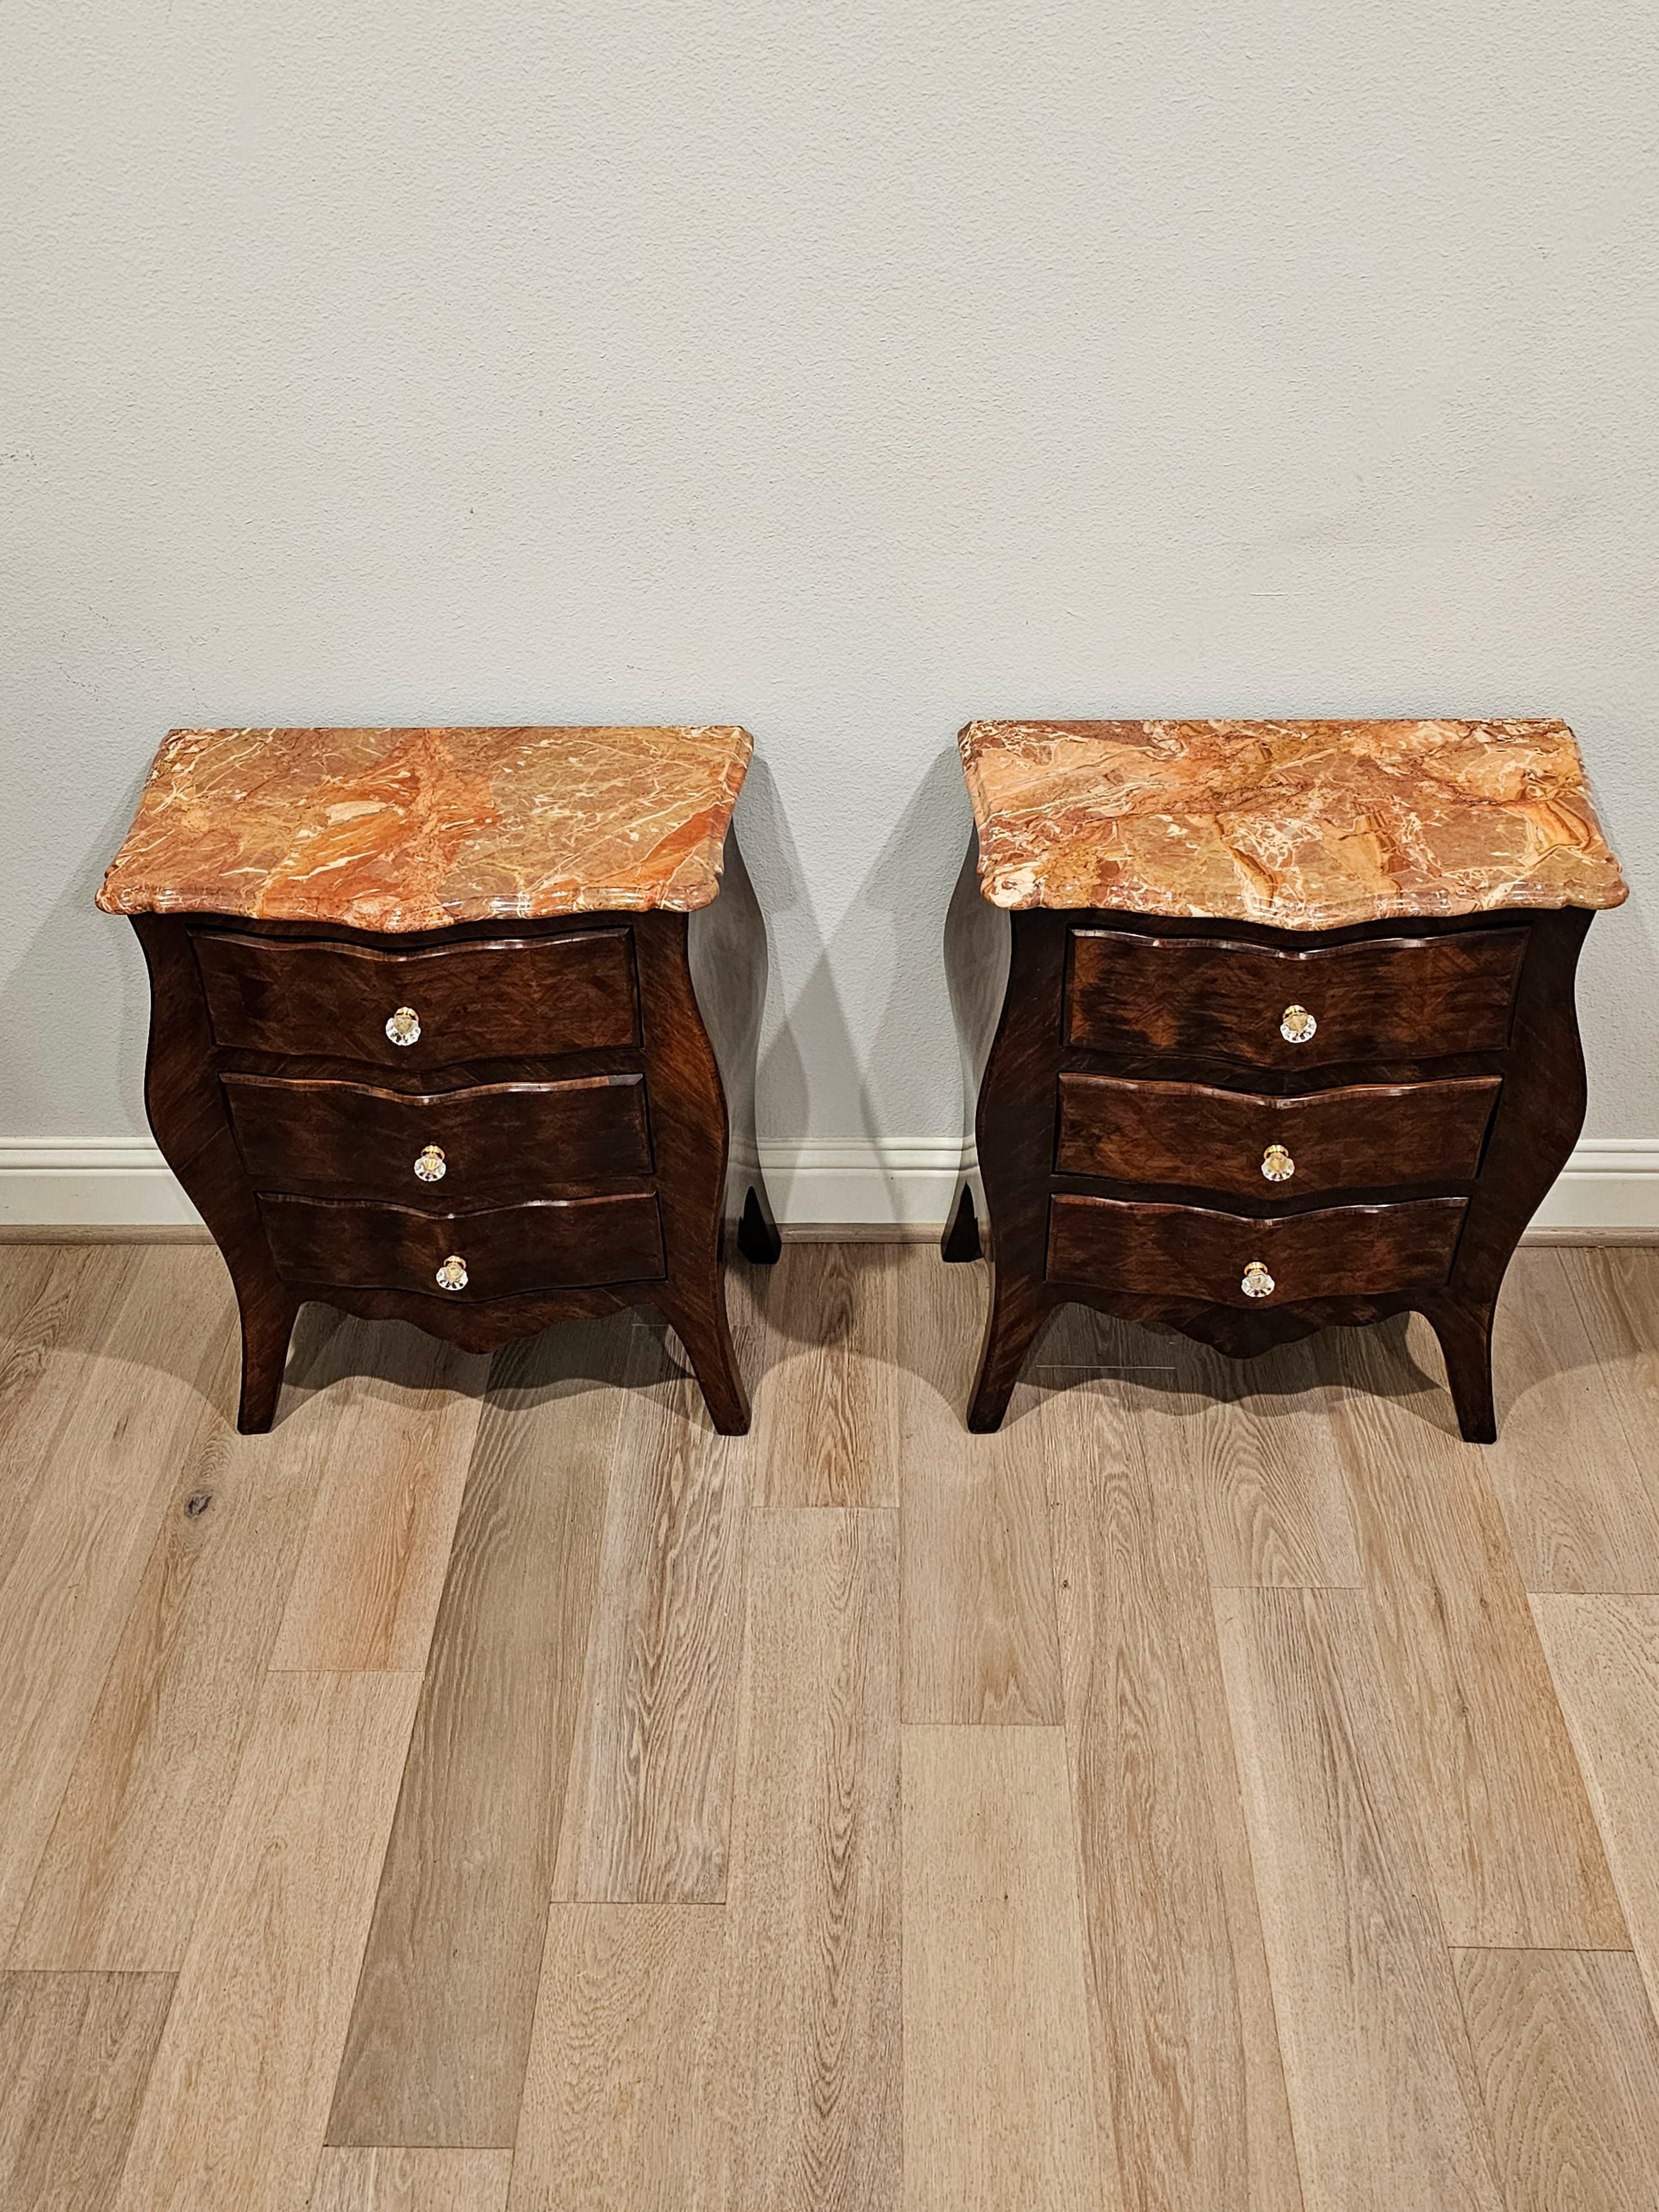 A pair of Italian antique matched kingwood nightstands. circa 1920

Finely hand-crafted in Italy in the early 20th century, high quality construction, craftsmanship and materials, featuring a stunning serpentine shaped breccia marble top with most